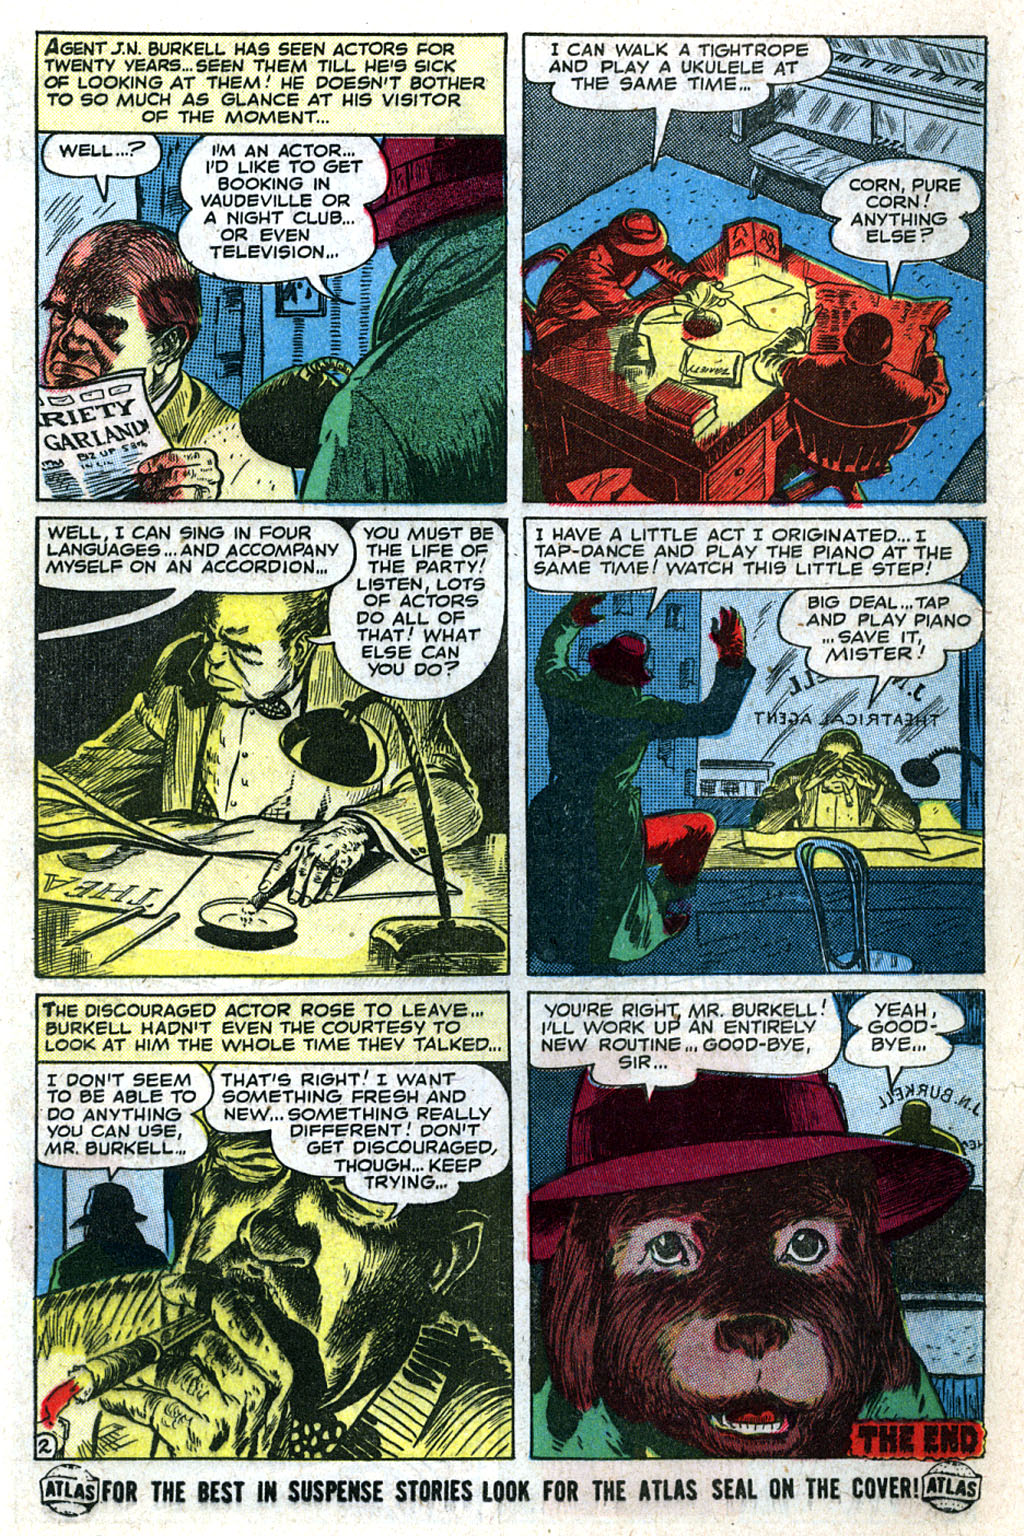 Marvel Tales (1949) 116 Page 18